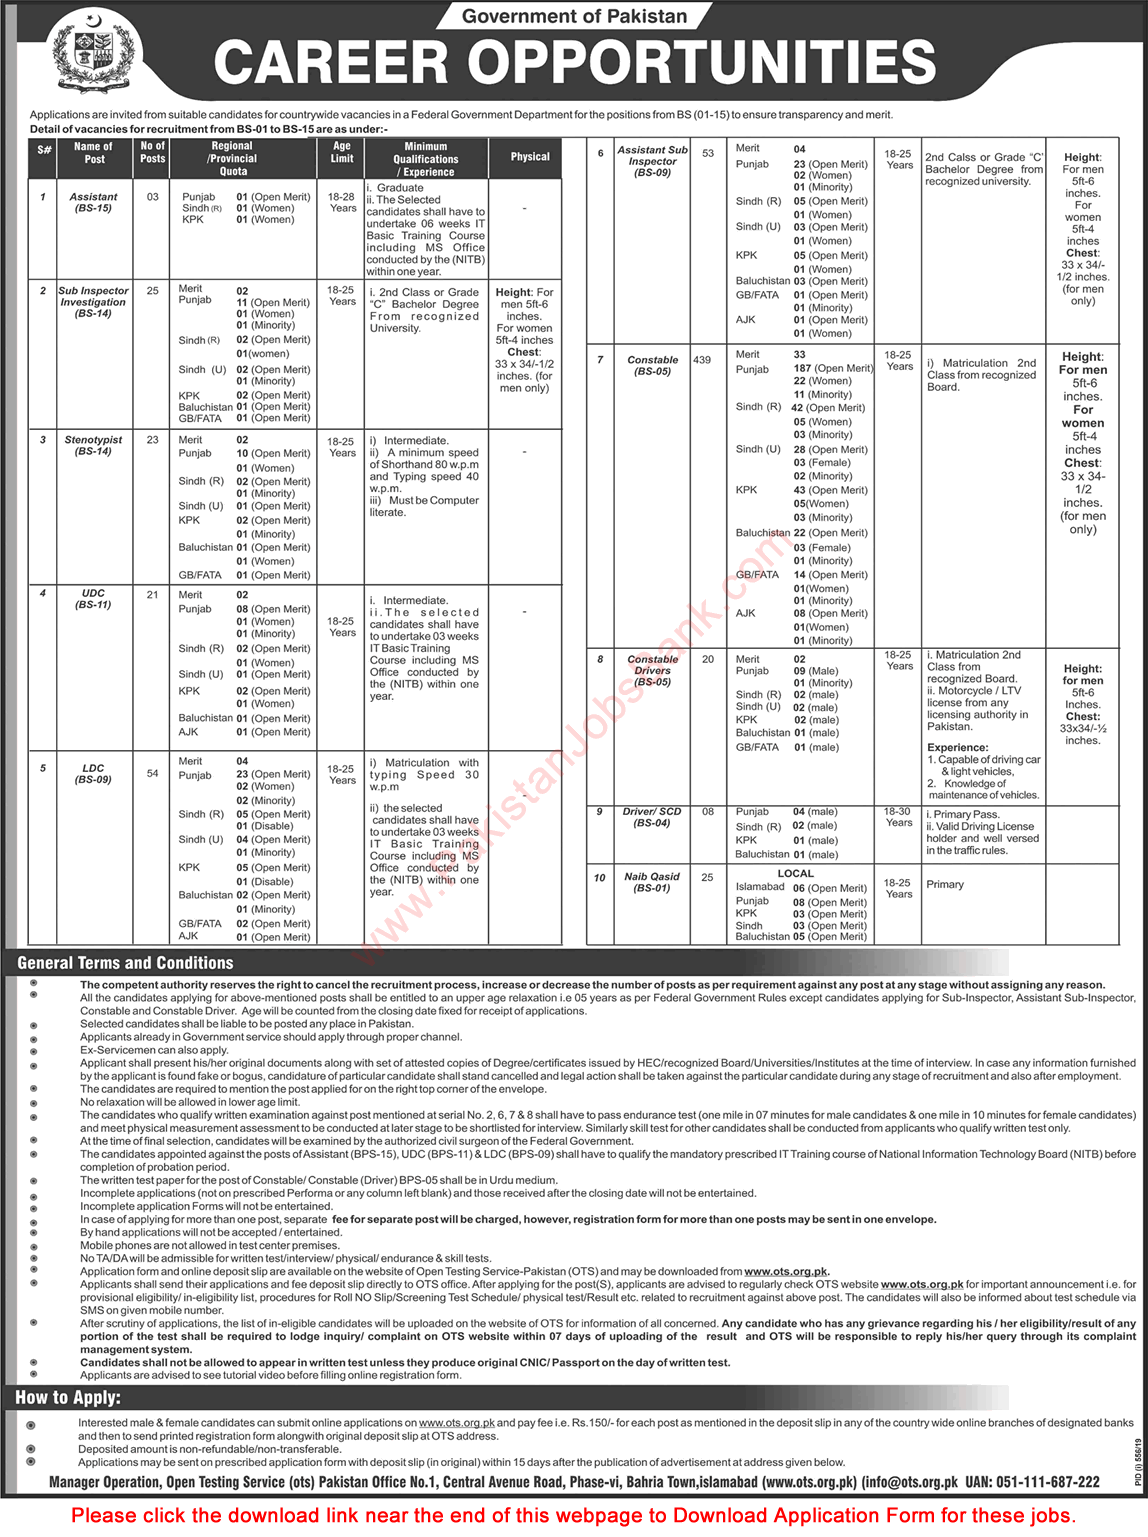 FIA Jobs July 2019 August Constables, ASI, Sub Inspectors & Others OTS Application Form Latest / New